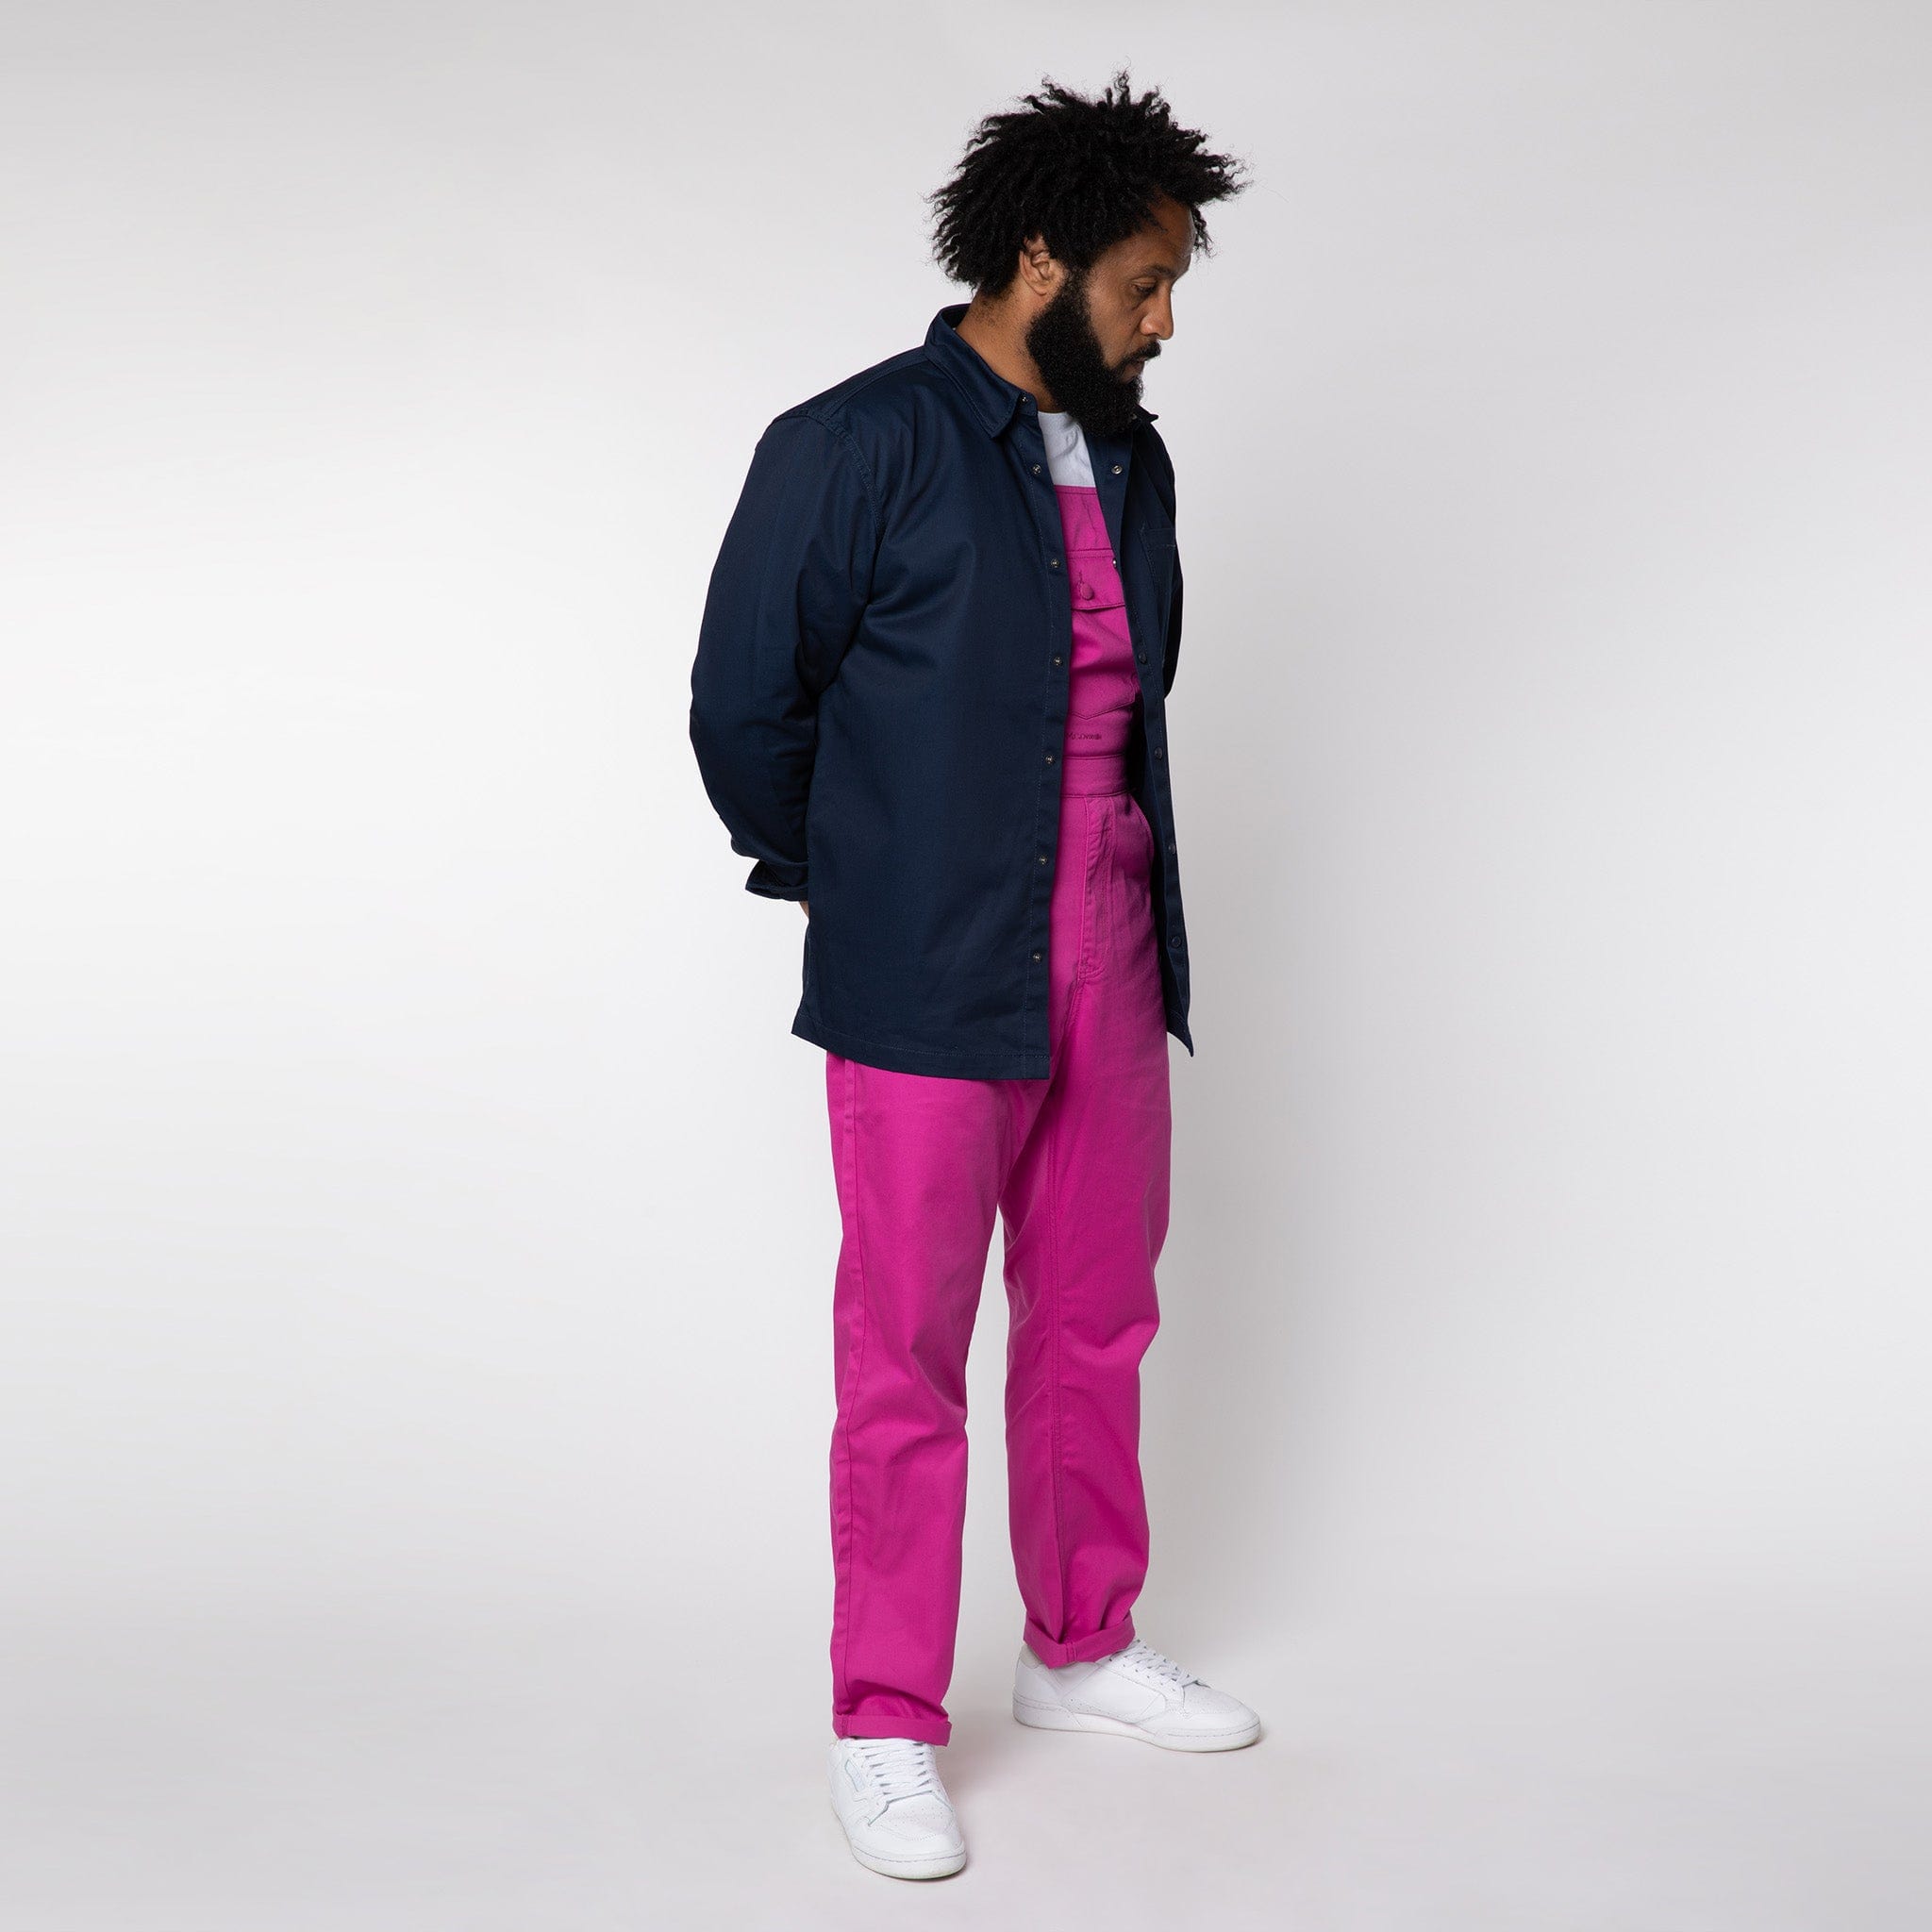 Men's Navy Snap Shirt Paired With Fuchsia Dungarees.